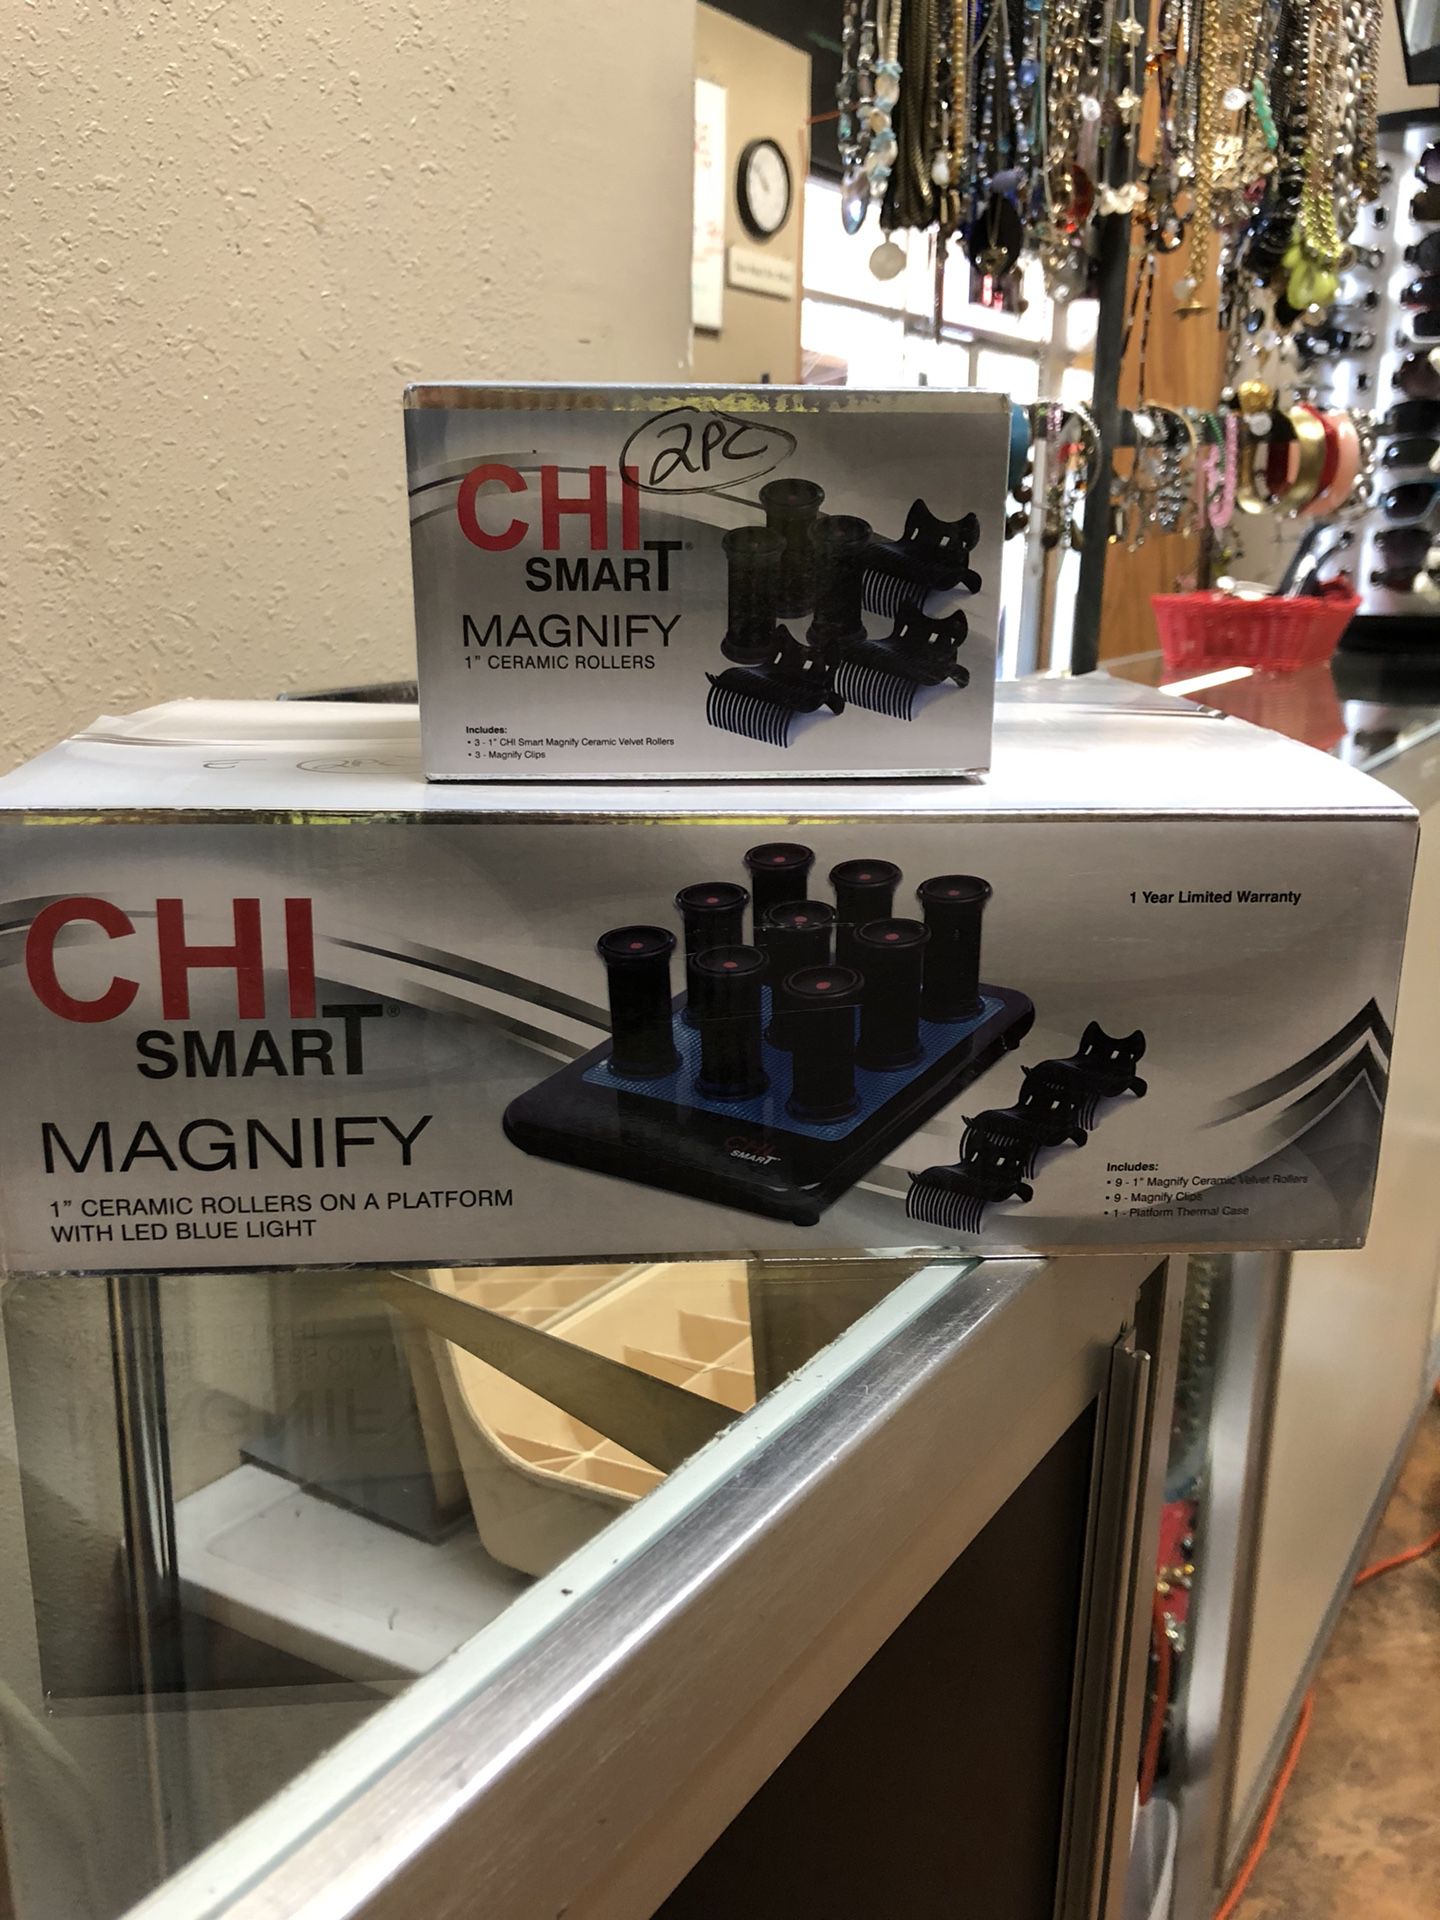 Chi Smart Magnify rollers